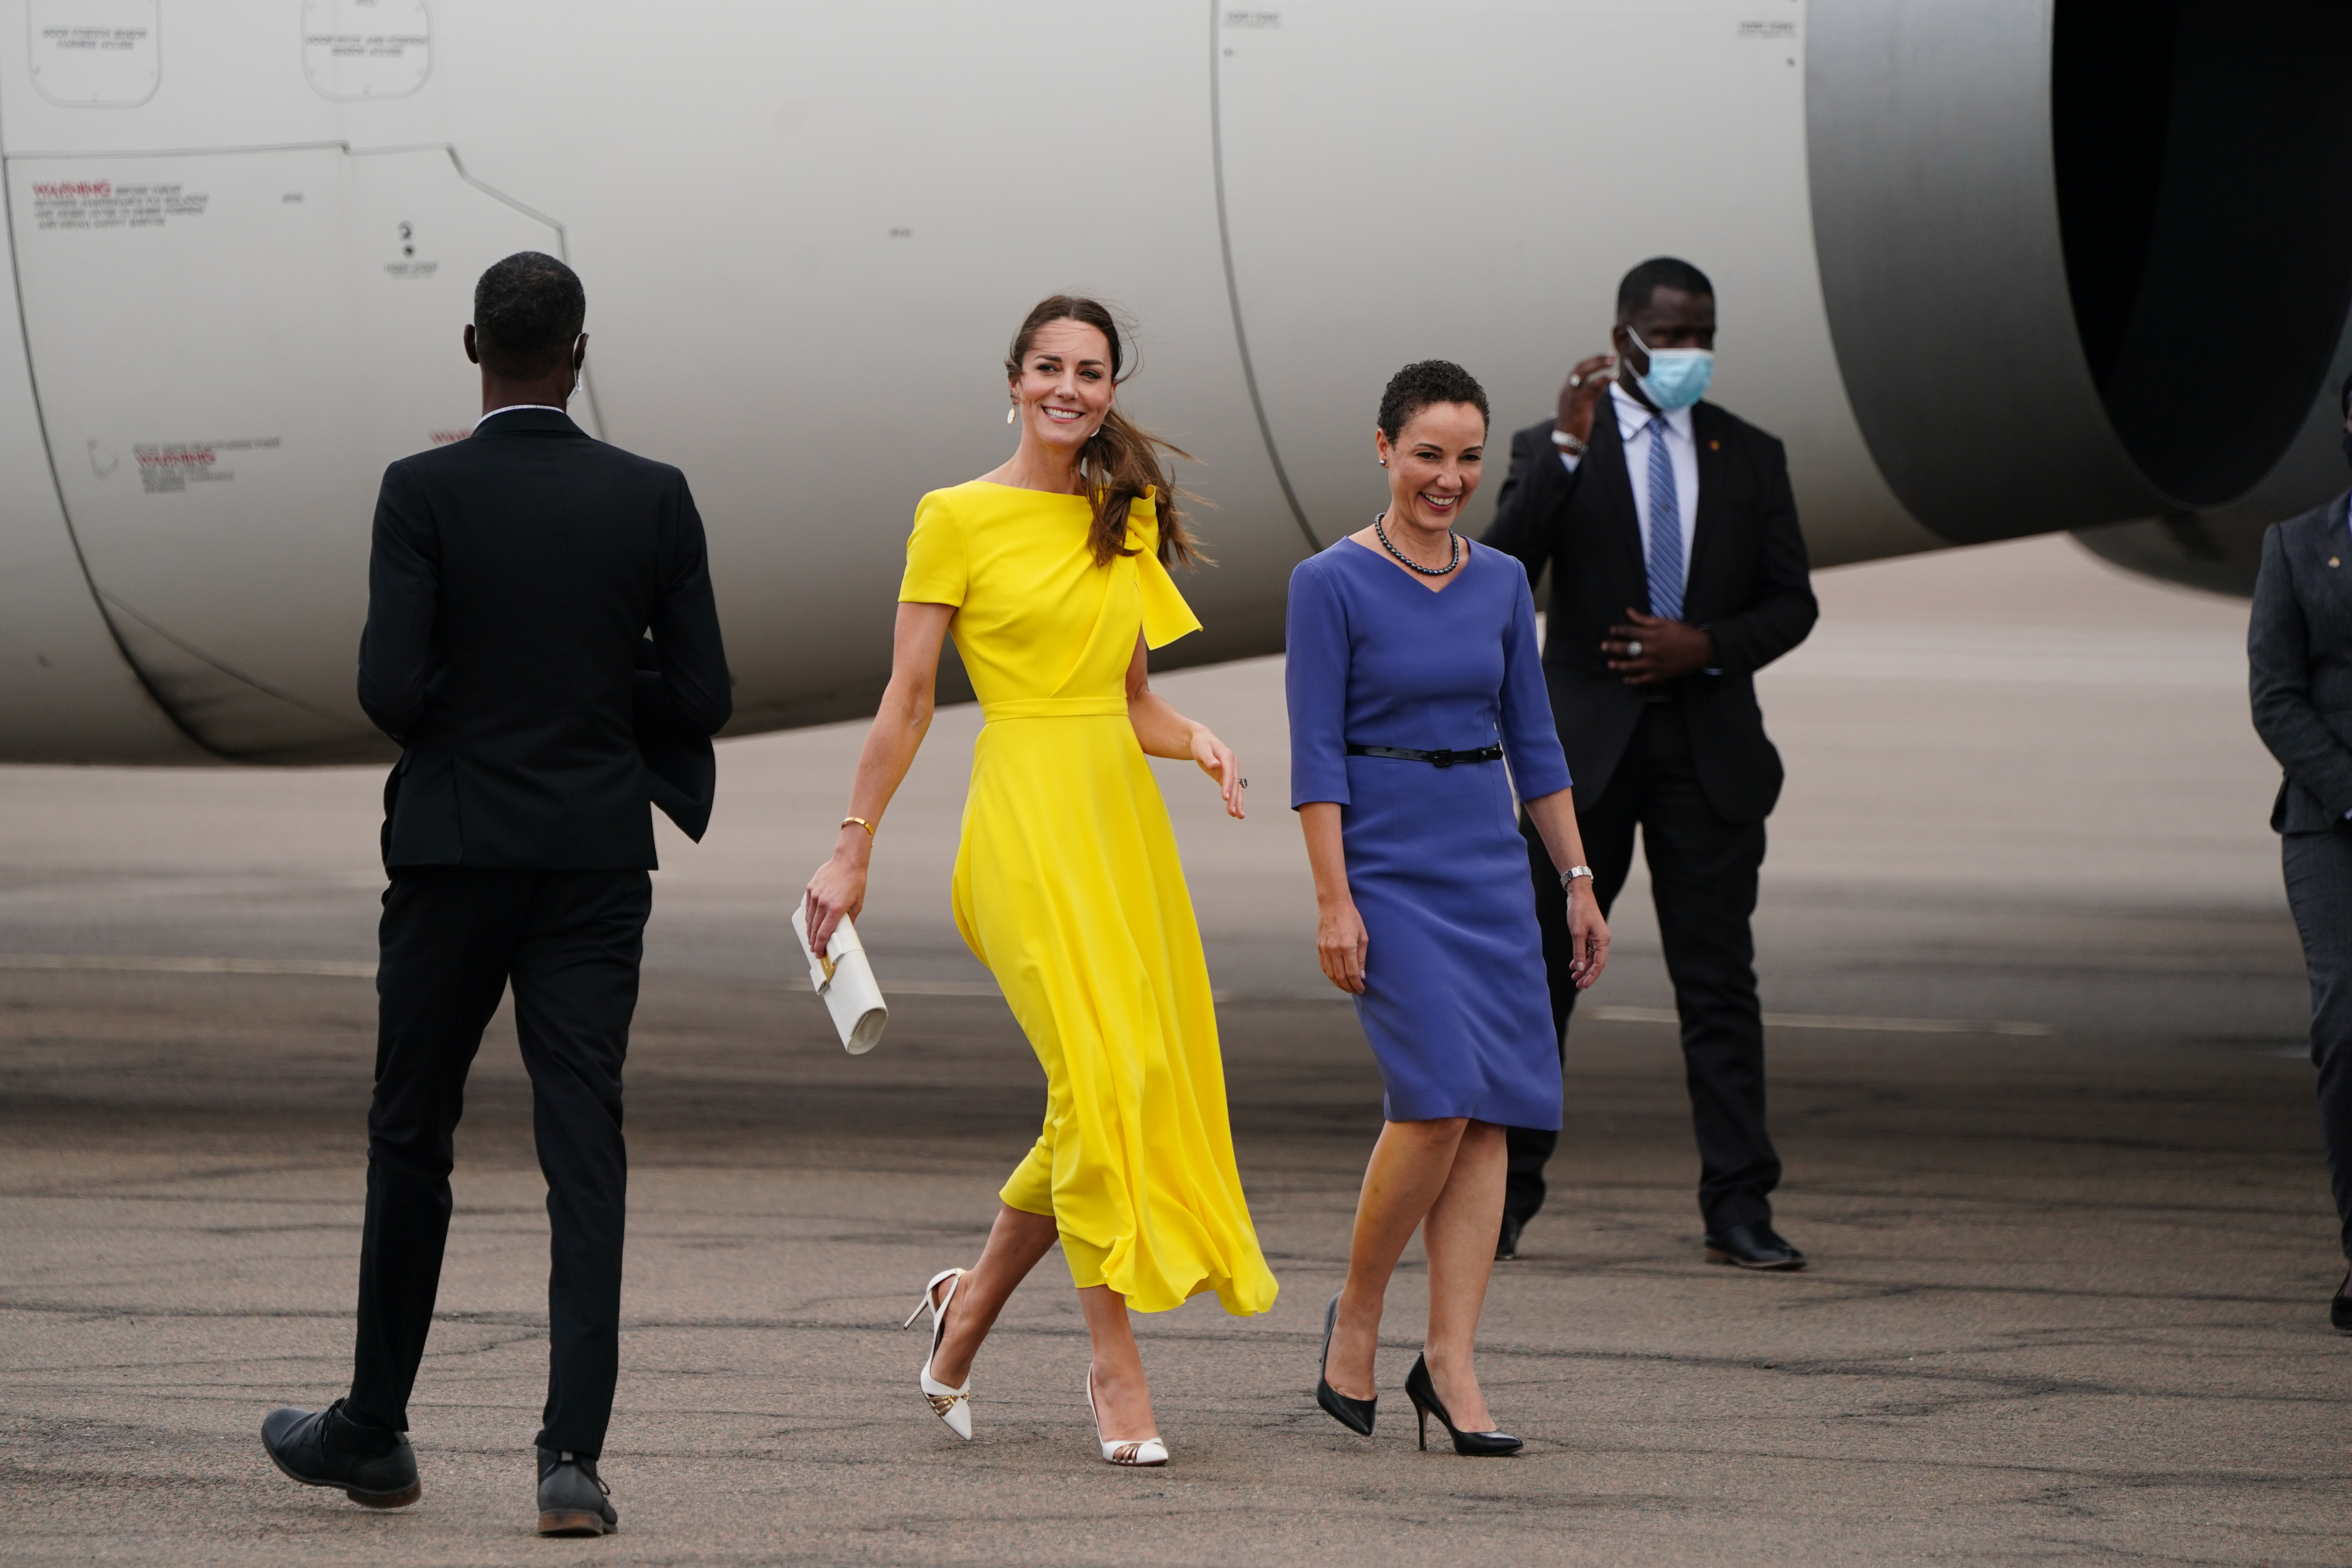 The Duchess of Cambridge arrives at Norman Manley International Airport in Kingston, Jamaica